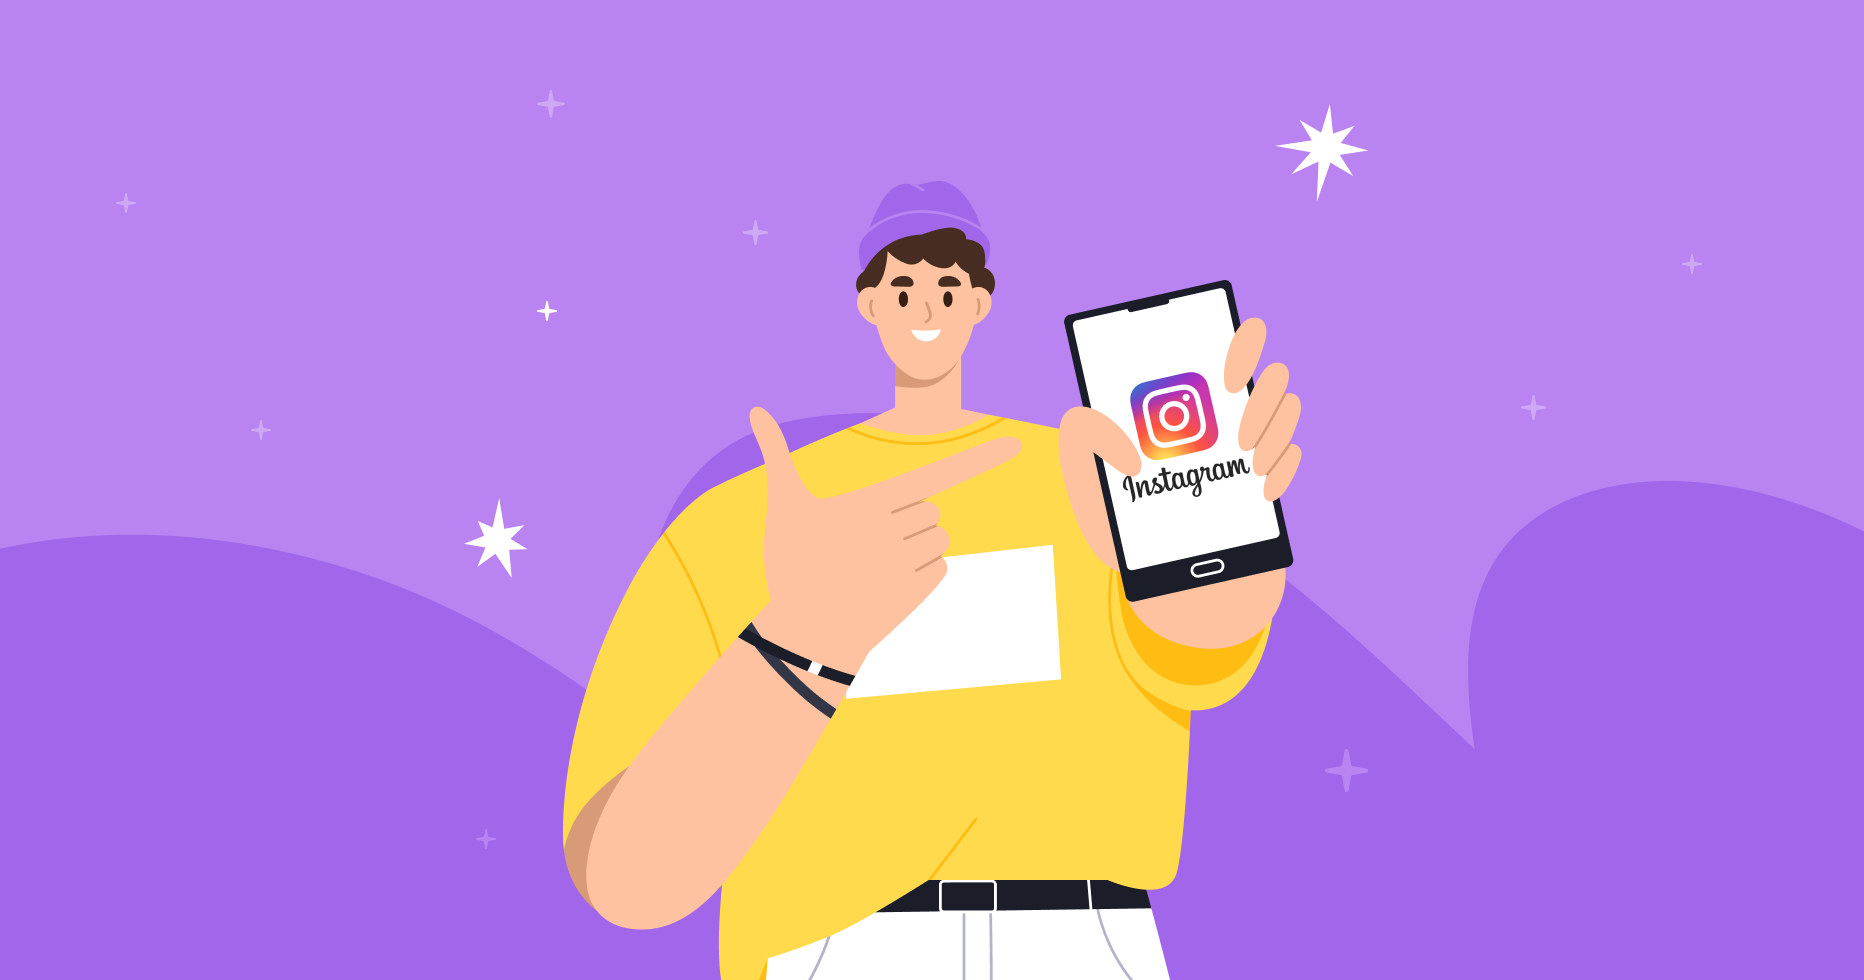 Showing man in yellow T-shirt showing smartphone with the Instagram icon.